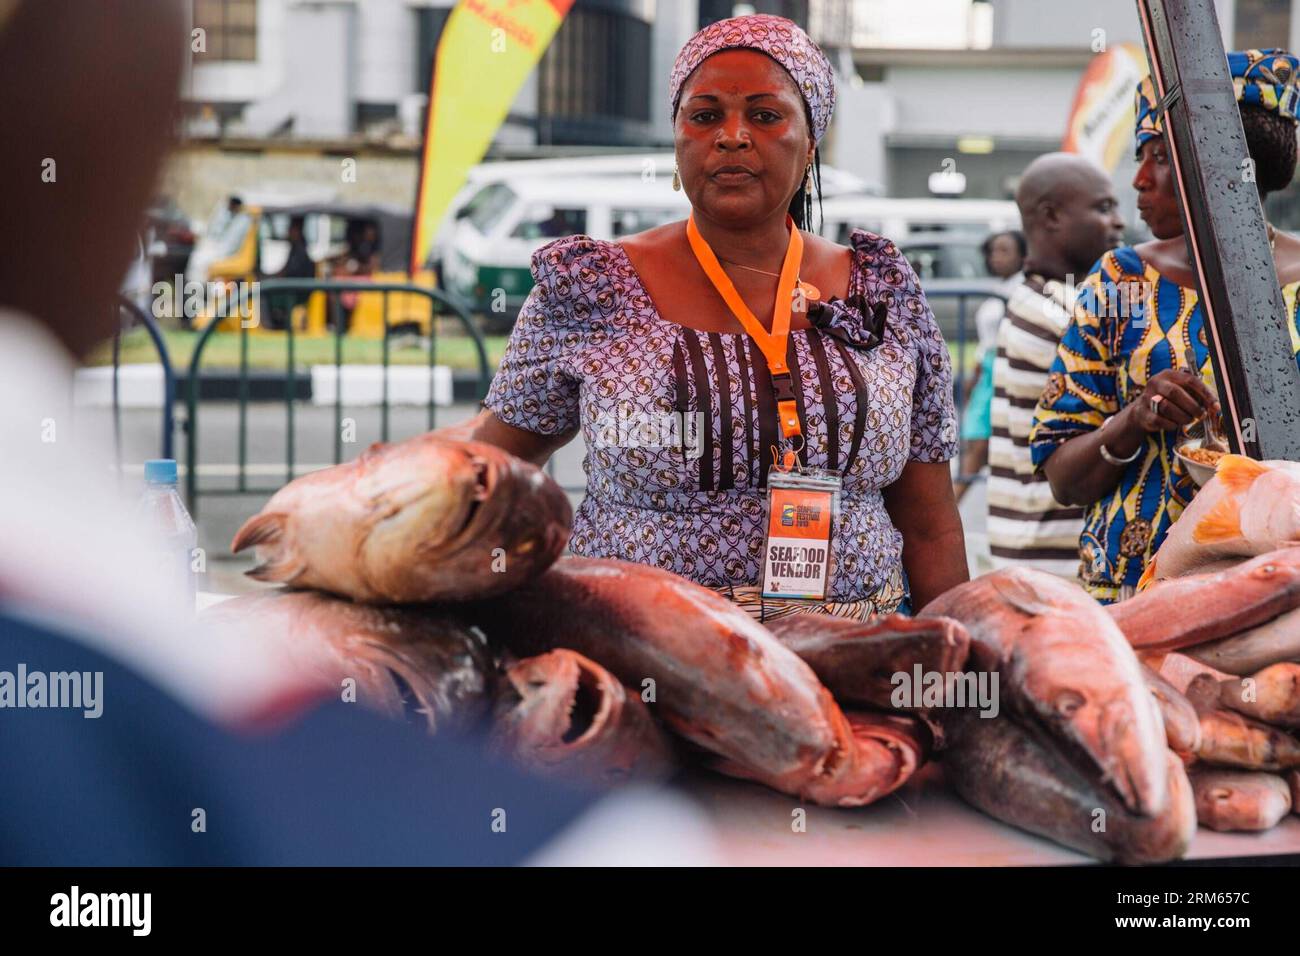 Bildnummer: 60806600  Datum: 07.12.2013  Copyright: imago/Xinhua     Fisherfolks sell seafood at the seafood festival in Lagos, Nigeria, Dec. 7, 2013. The festival opened here on Saturday with the participation of 3,000 drawn from stakeholders in the Aquaculture Value Chain, as the Christmas is approaching.(Xinhua/Zhang Weiyi) NIGERIA-LAGOS-SEAFOOD-FESTIVAL PUBLICATIONxNOTxINxCHN xcb x0x 2013 quer Stock Photo